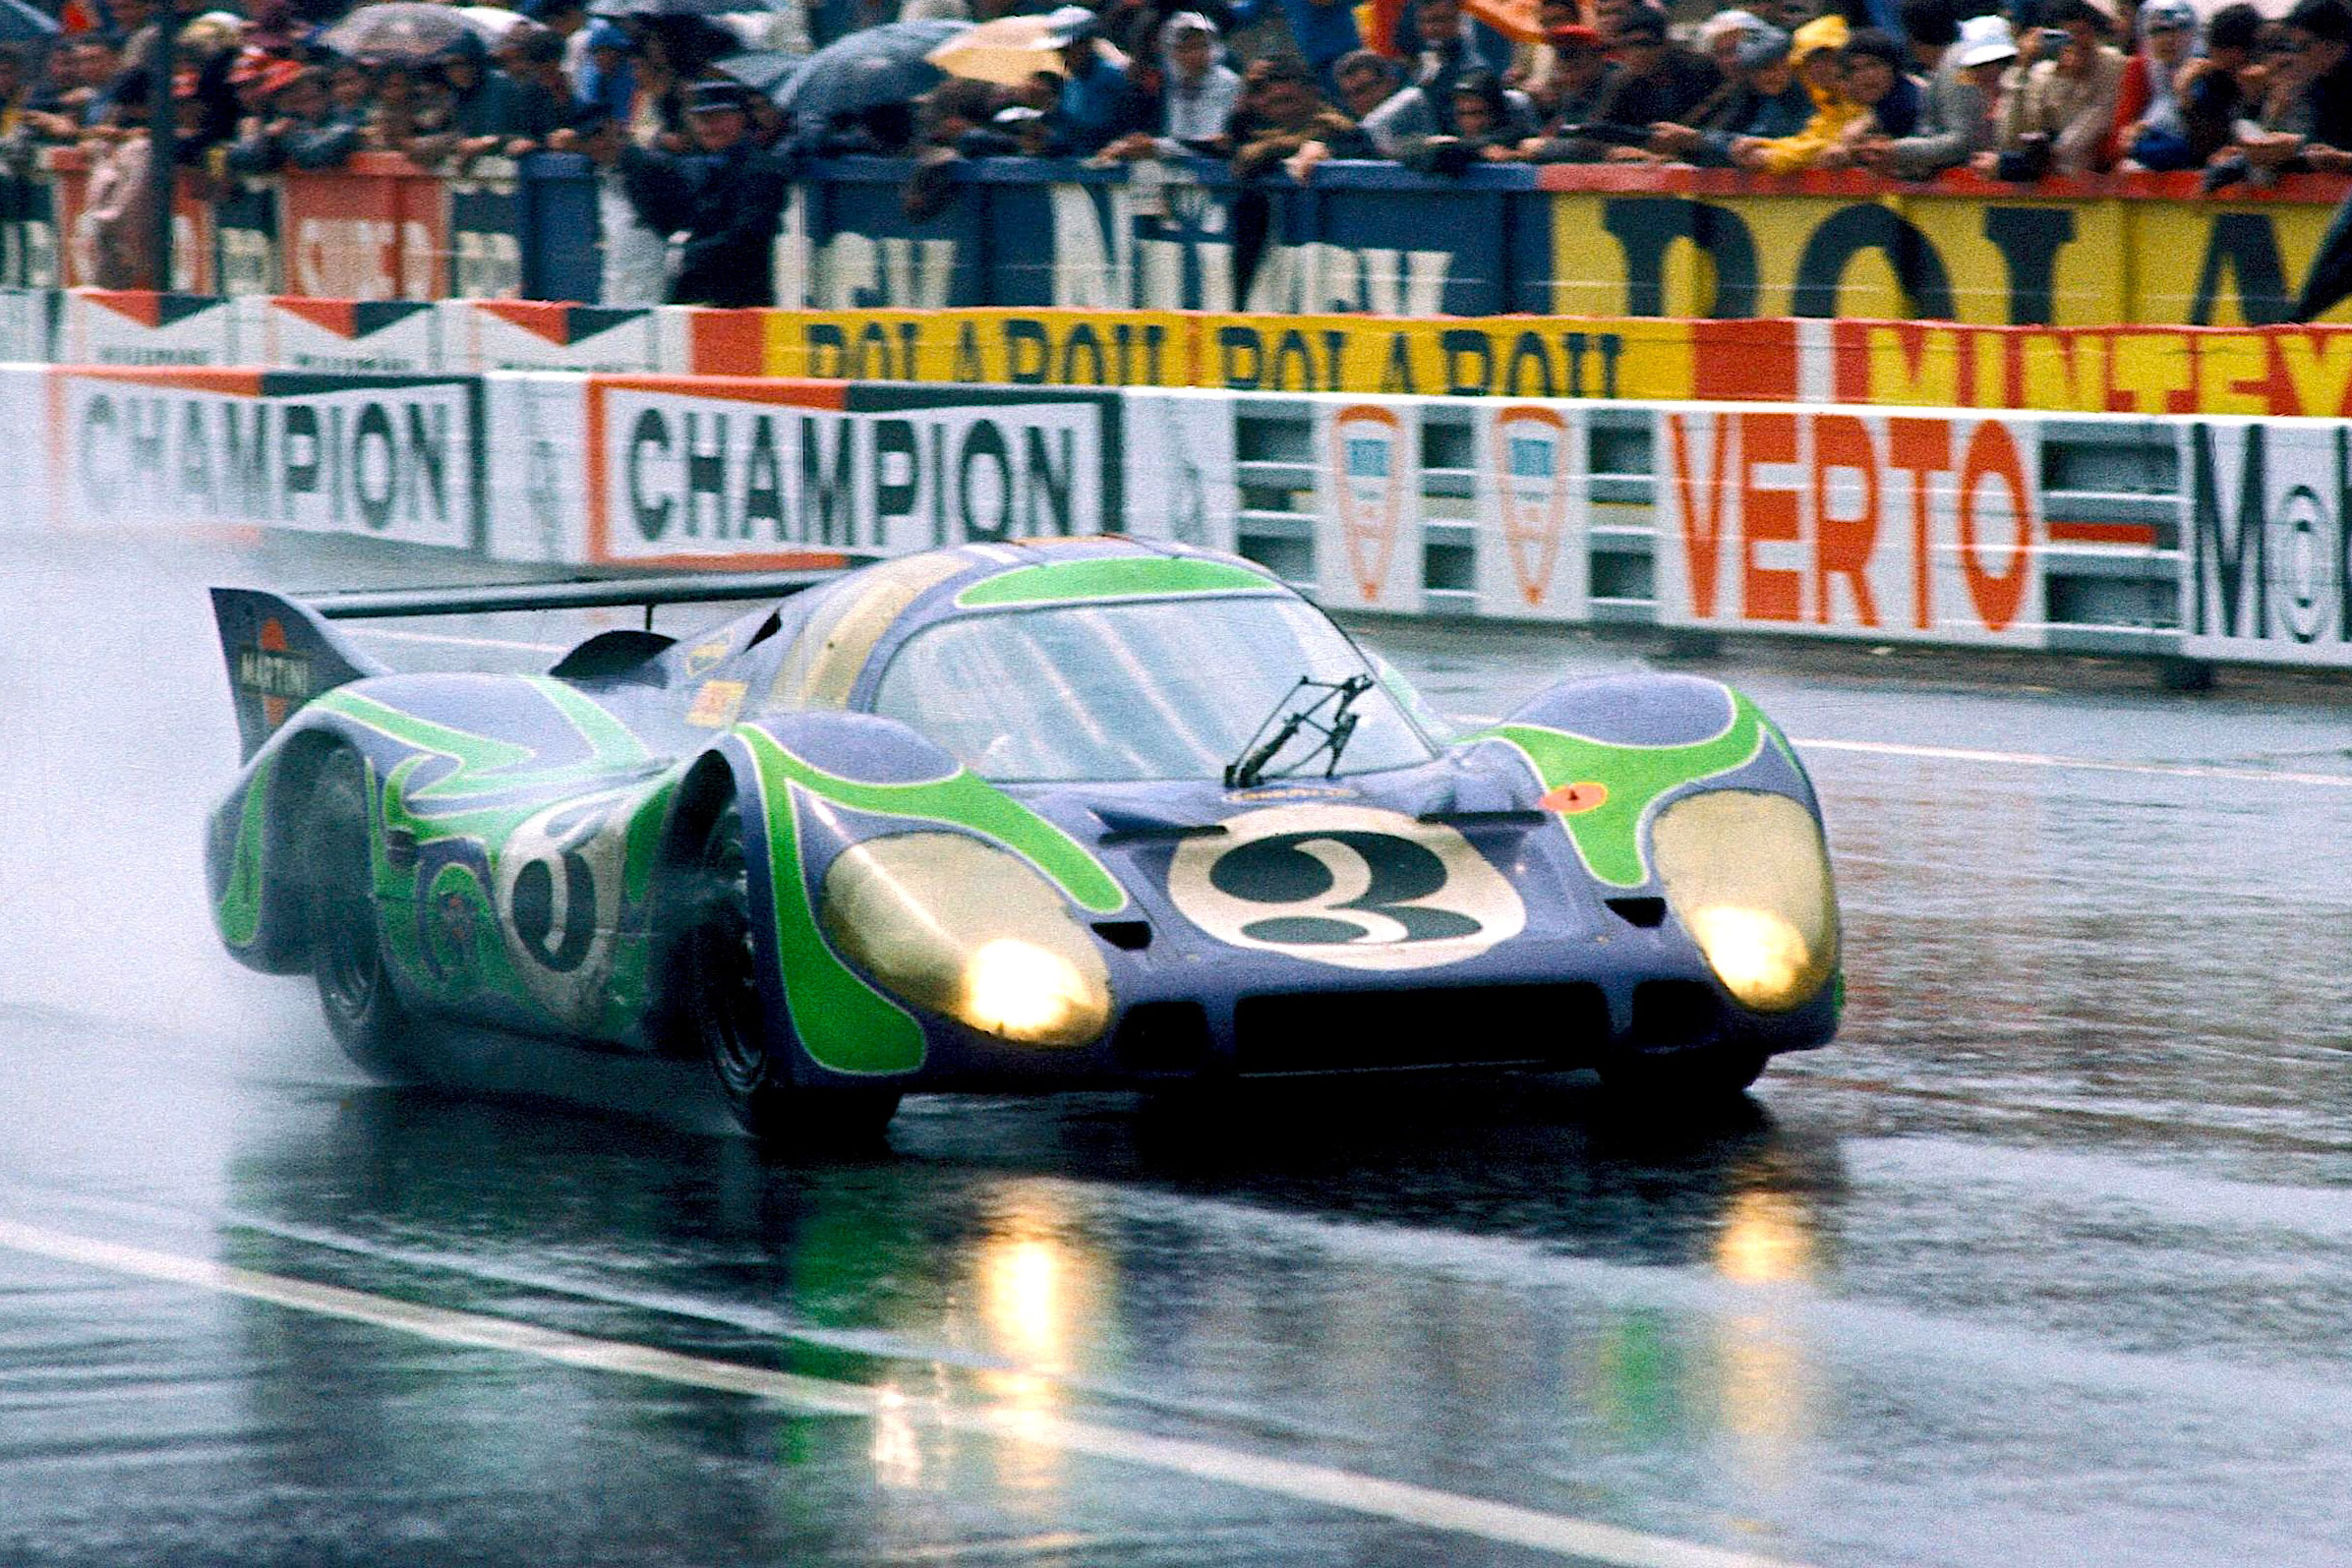 ‘Hoodwinked’ The Curious Case of the Le Mans Winner, the Mechanic & Fake Porsches